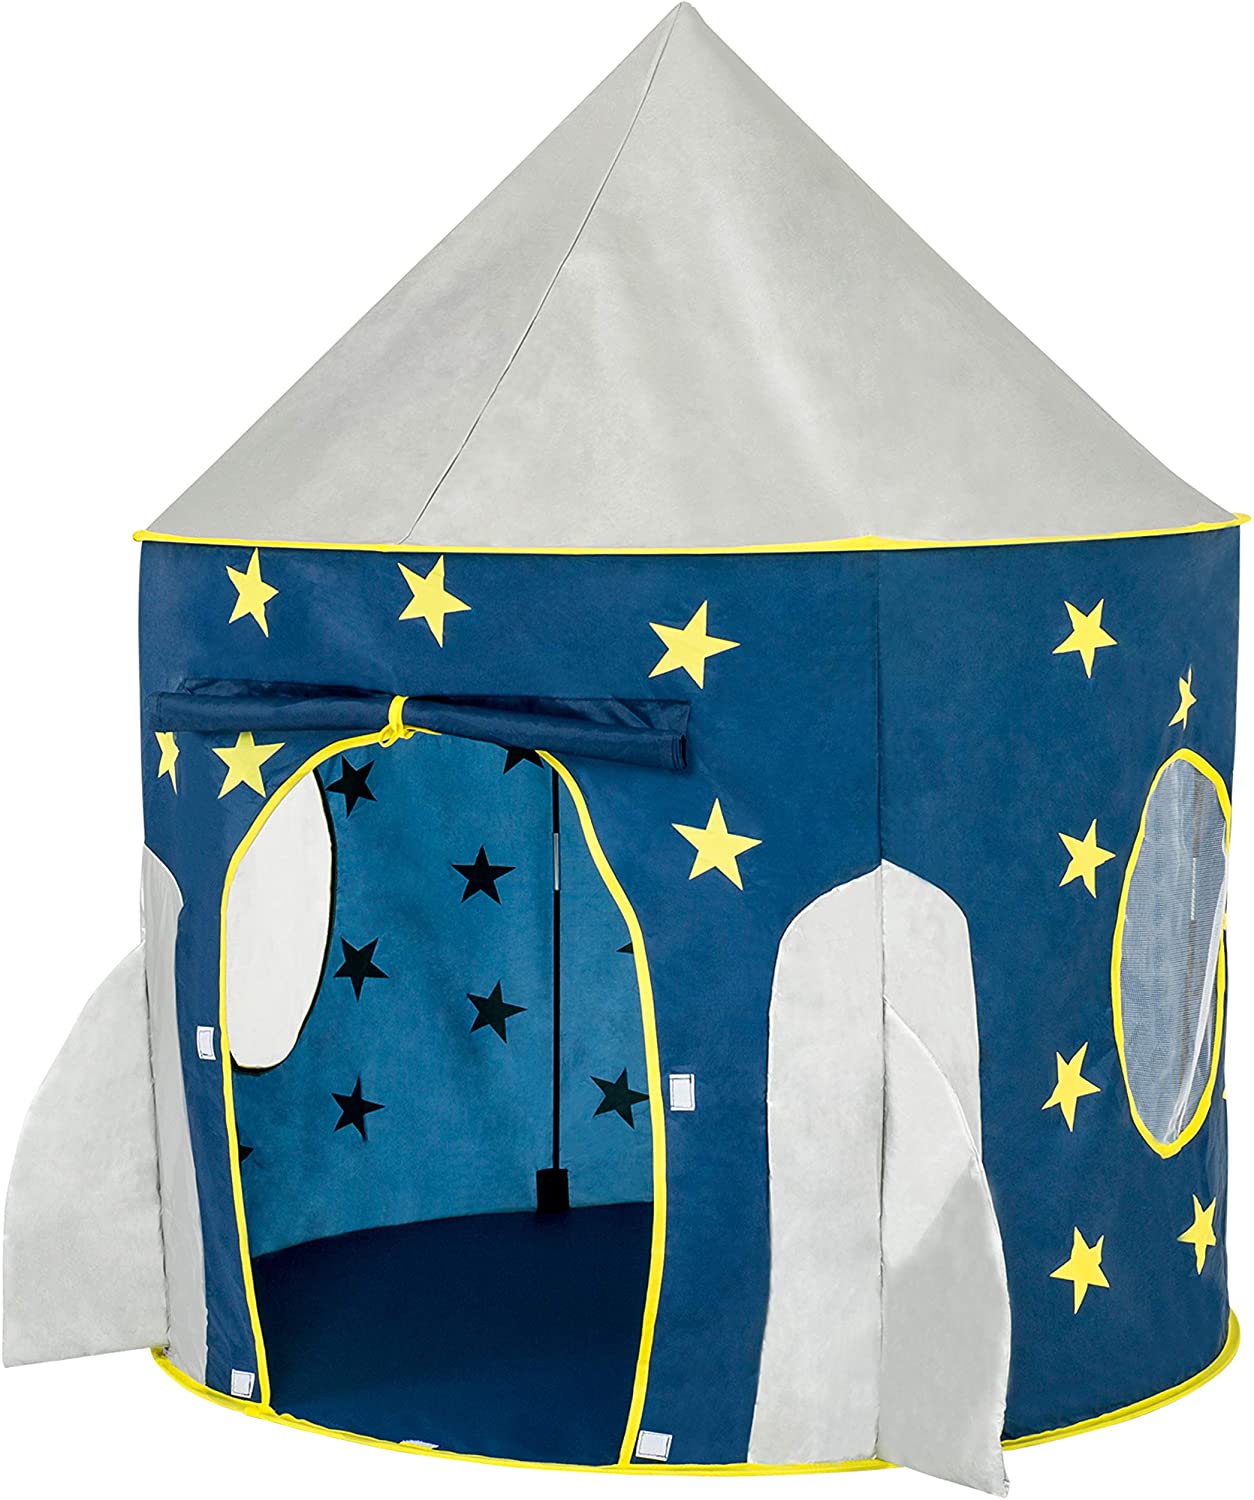 FoxPrint Foldable Indoor Rocketship Playhouse For Kids